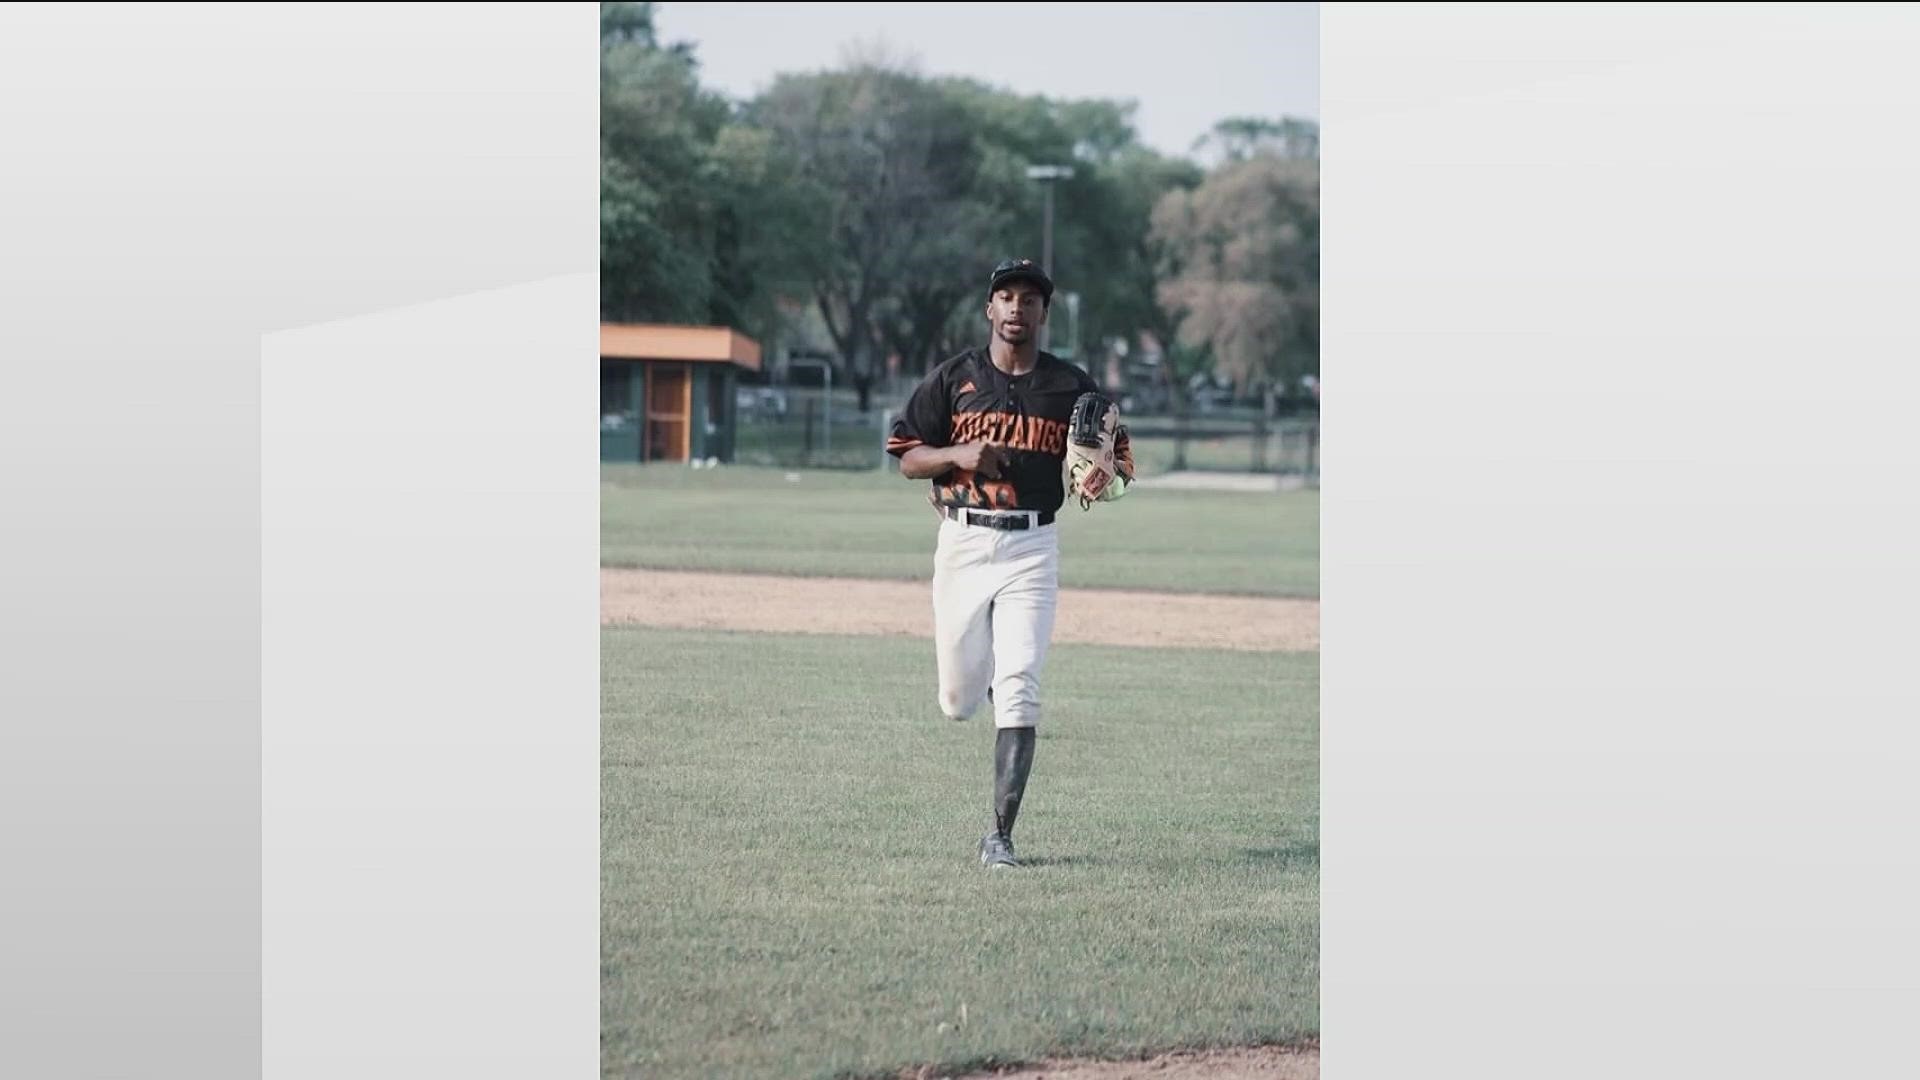 The Fulton County Medical Examiner later identified the 20-year-old killed as Jatonne Sterling. He was a member of CAU's baseball team, the university said.